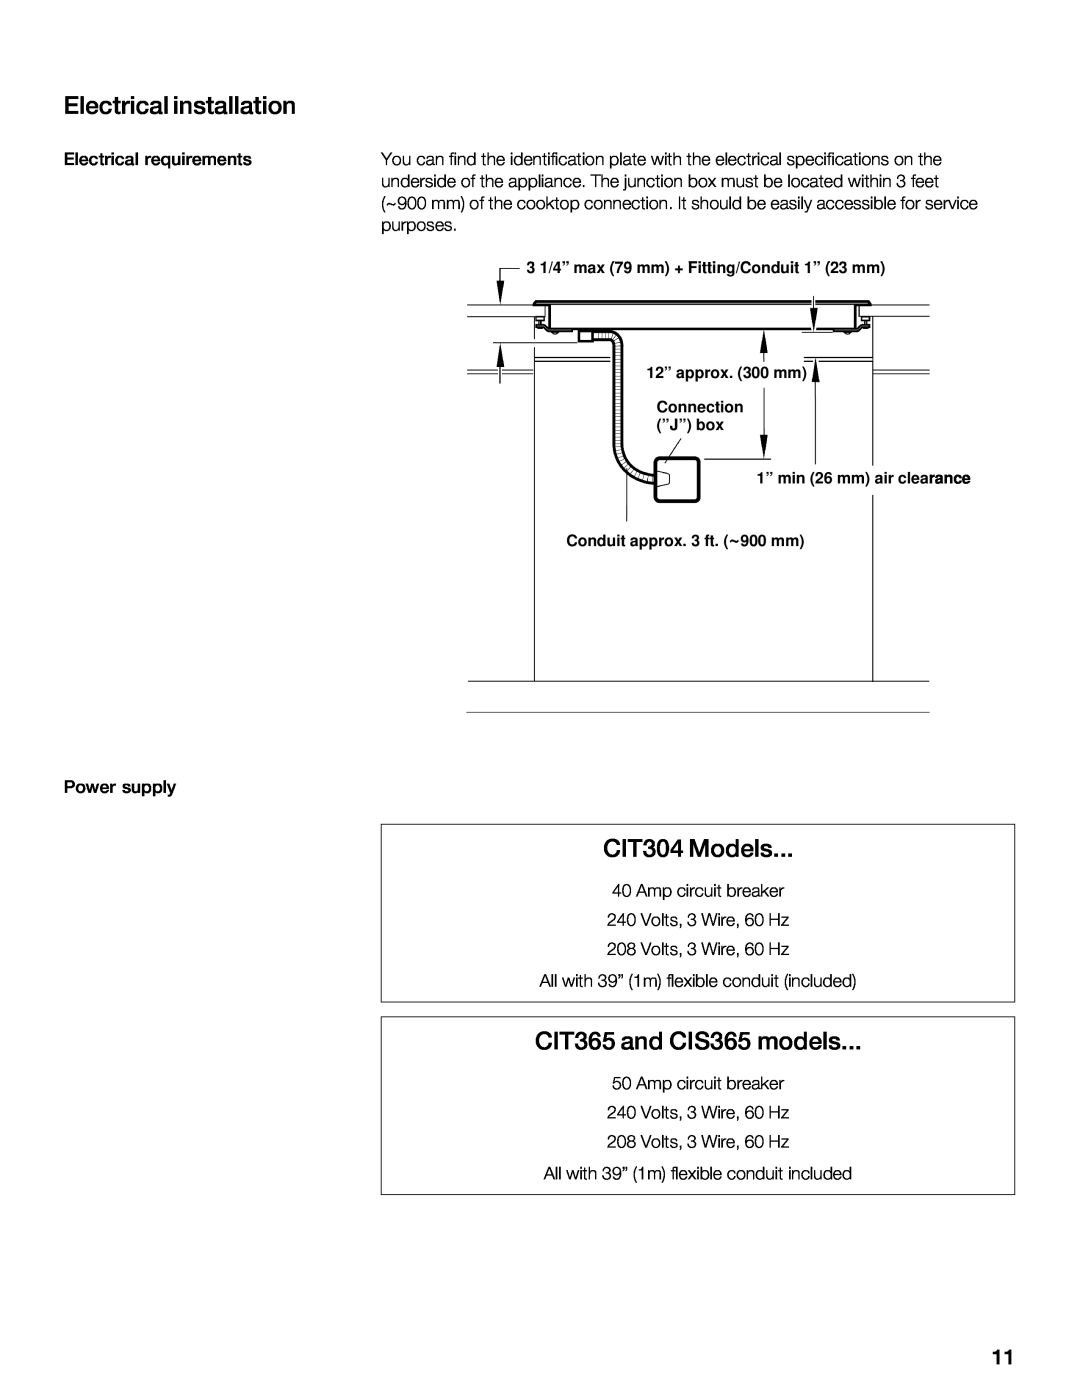 Thermador installation instructions Electrical installation, CIT304, Models, CIT365 and CIS365 models 